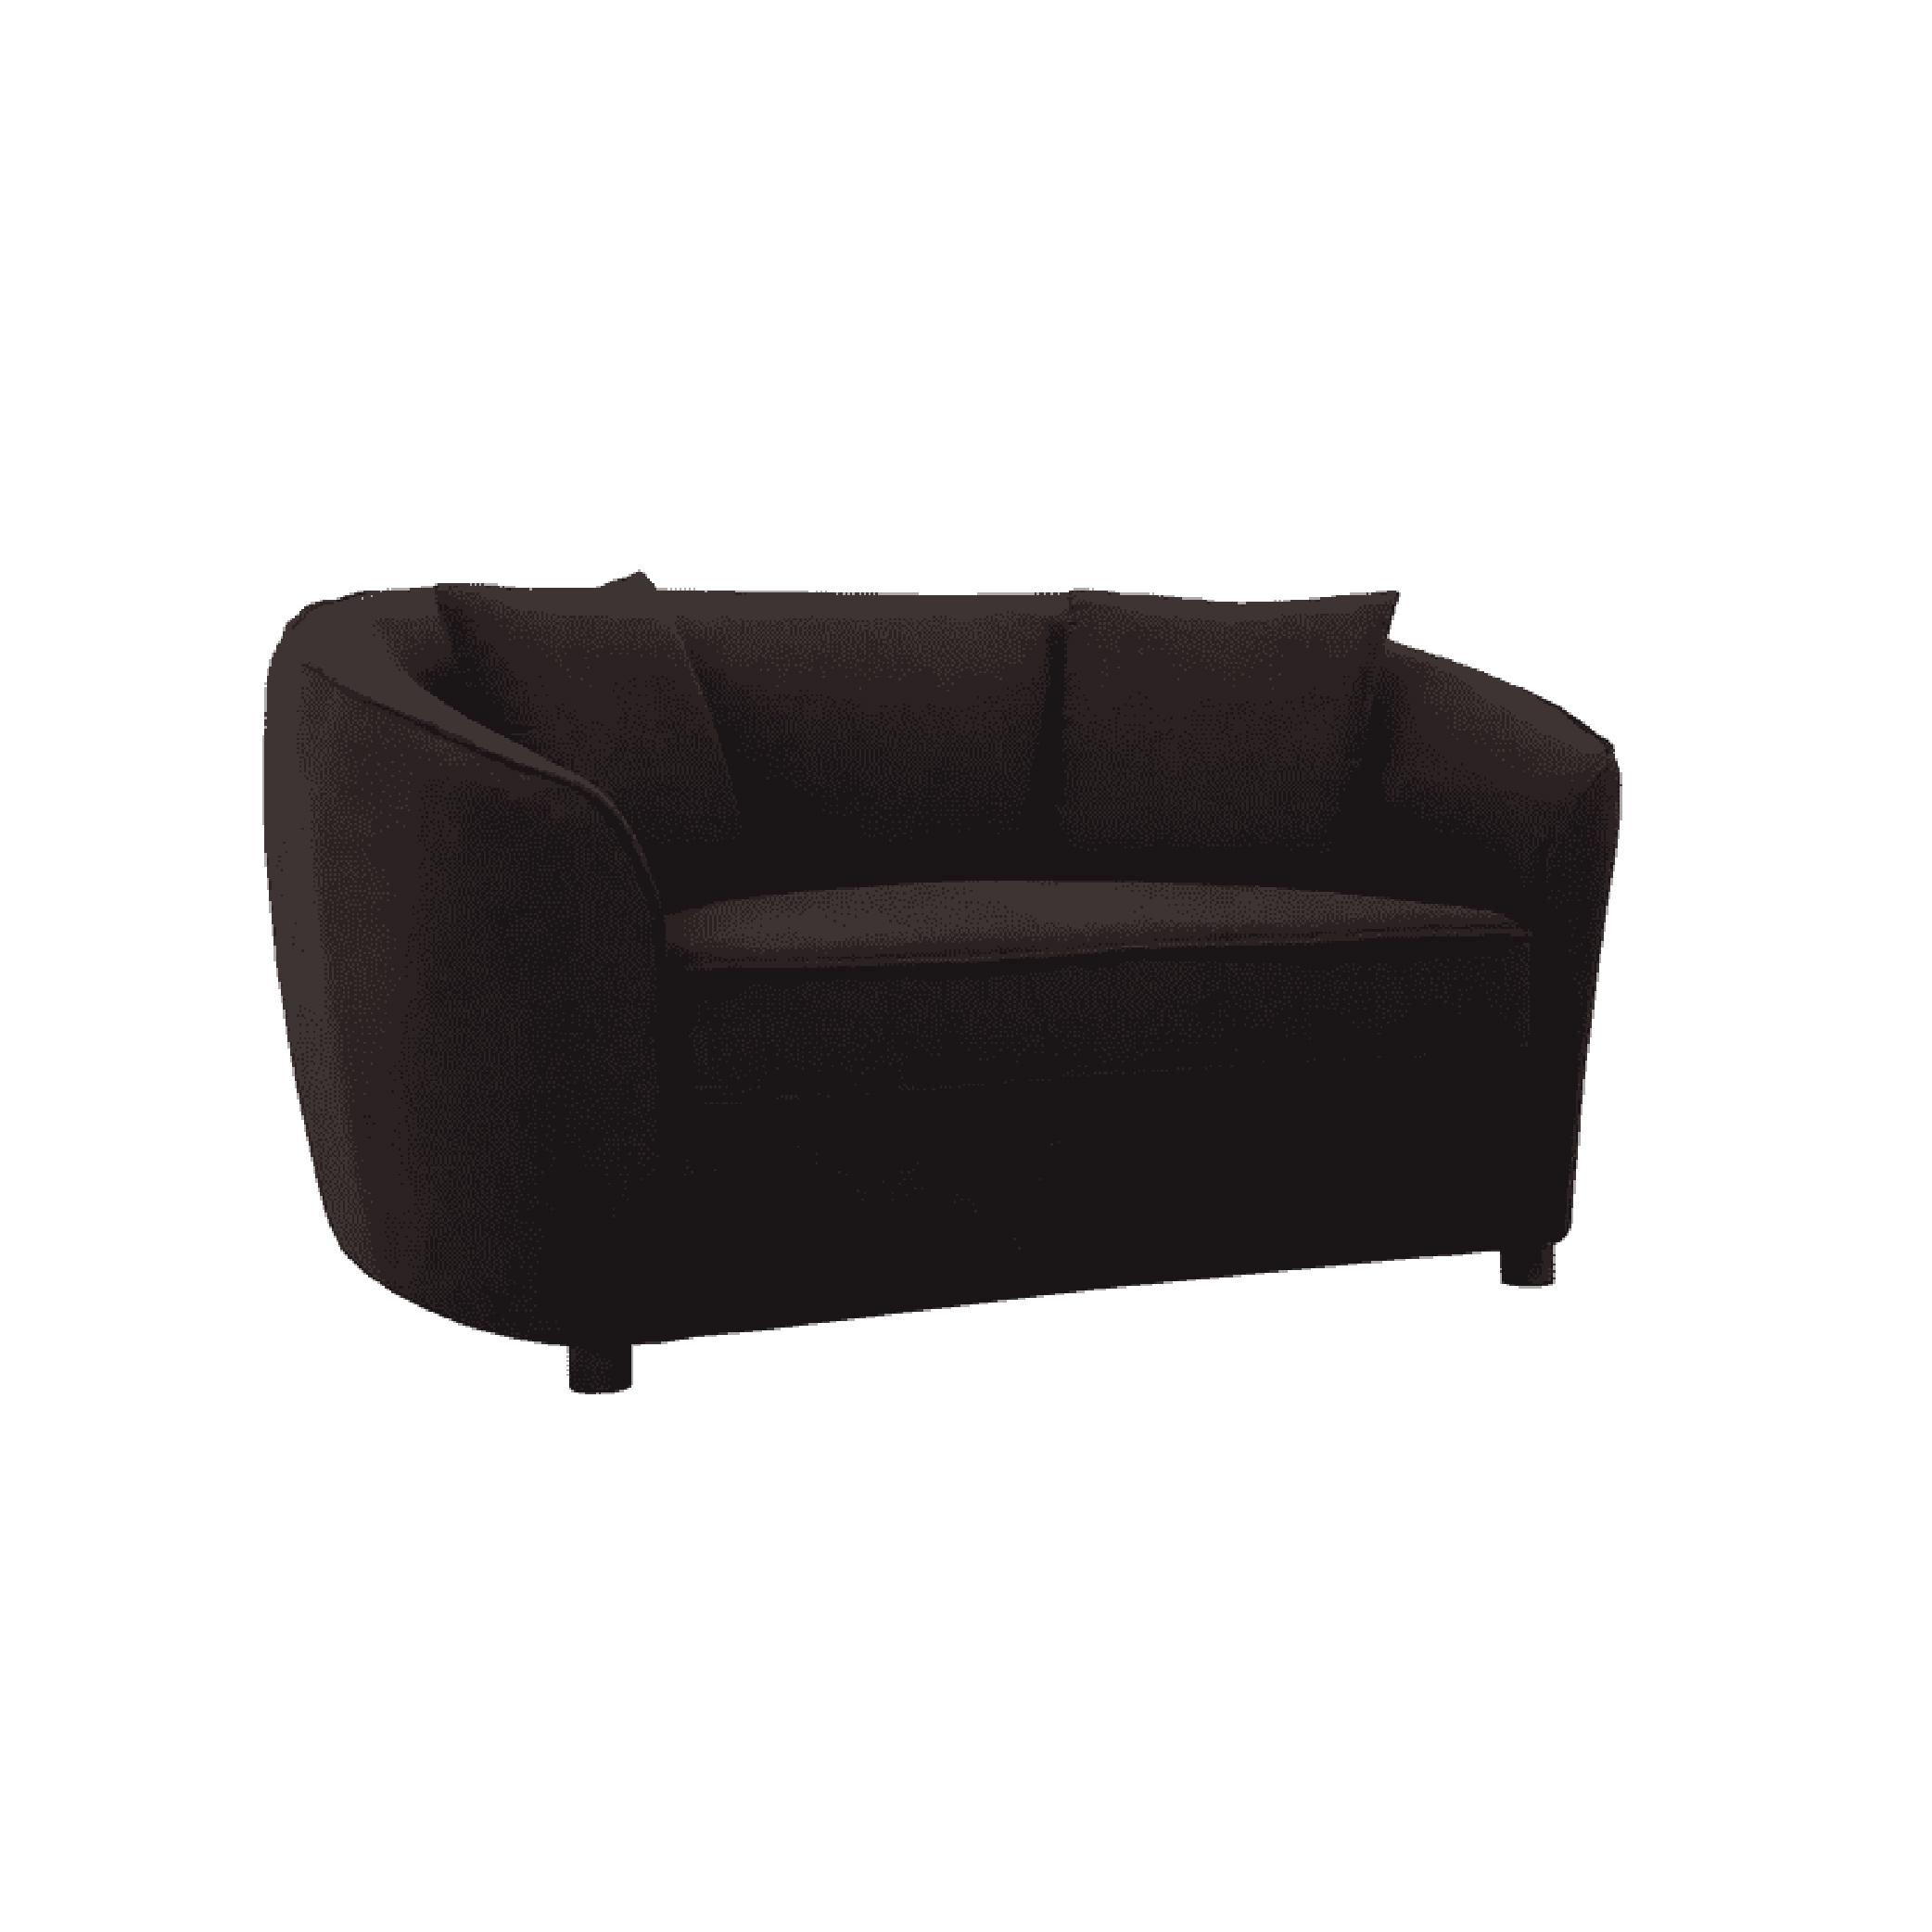 Ziata Two Seater Sofa in Charcoal Grey Colour